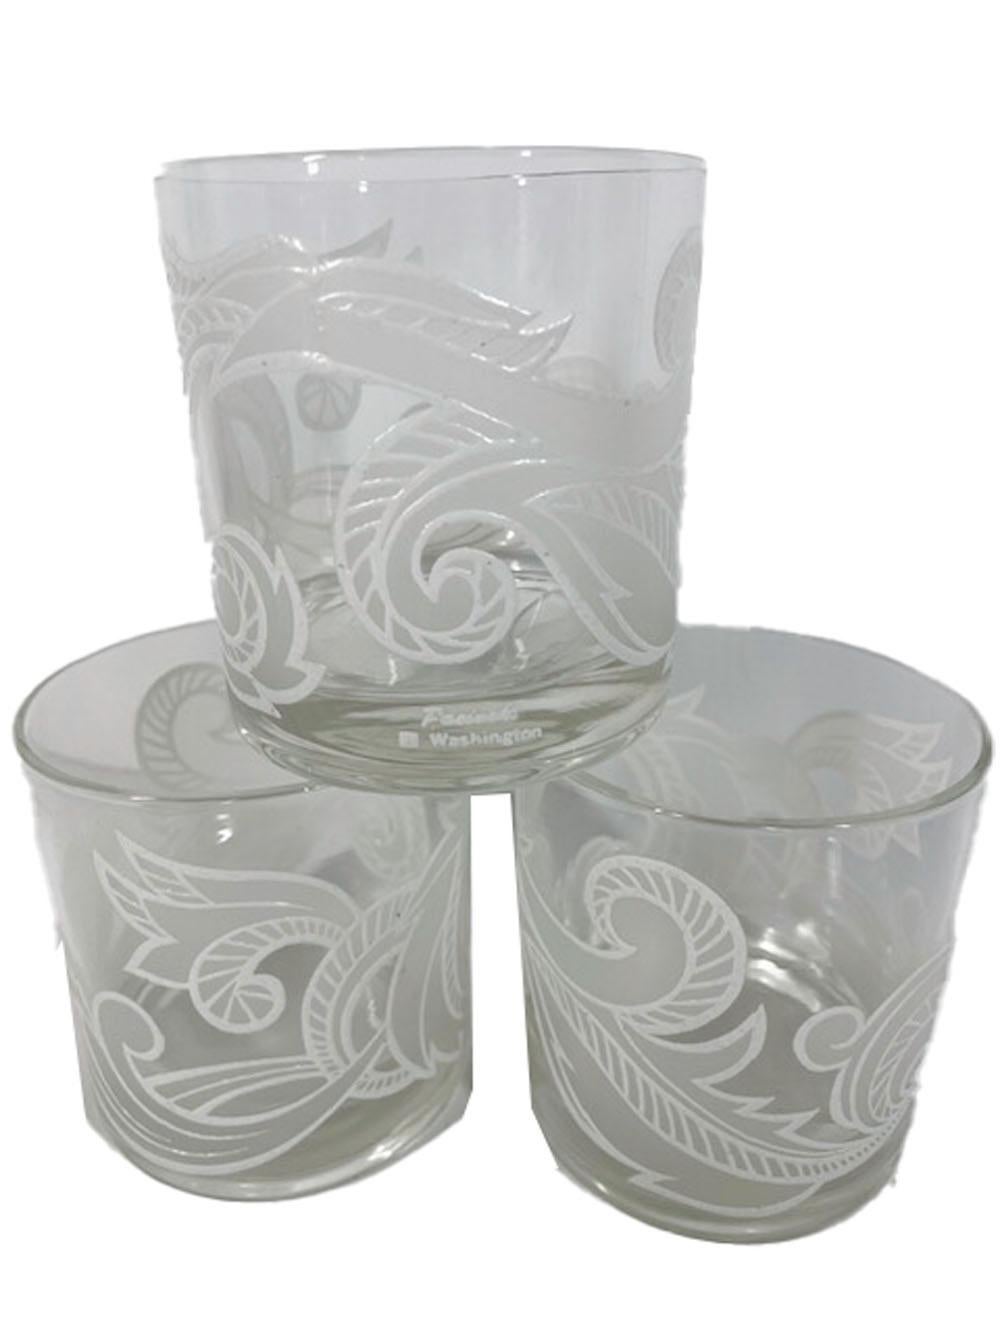 Six vintage cocktail glasses designed by Irene Pasinski for Washington Glass, decorated with a scrolling leaf motif with white frosted fields with raised white outline and detail.